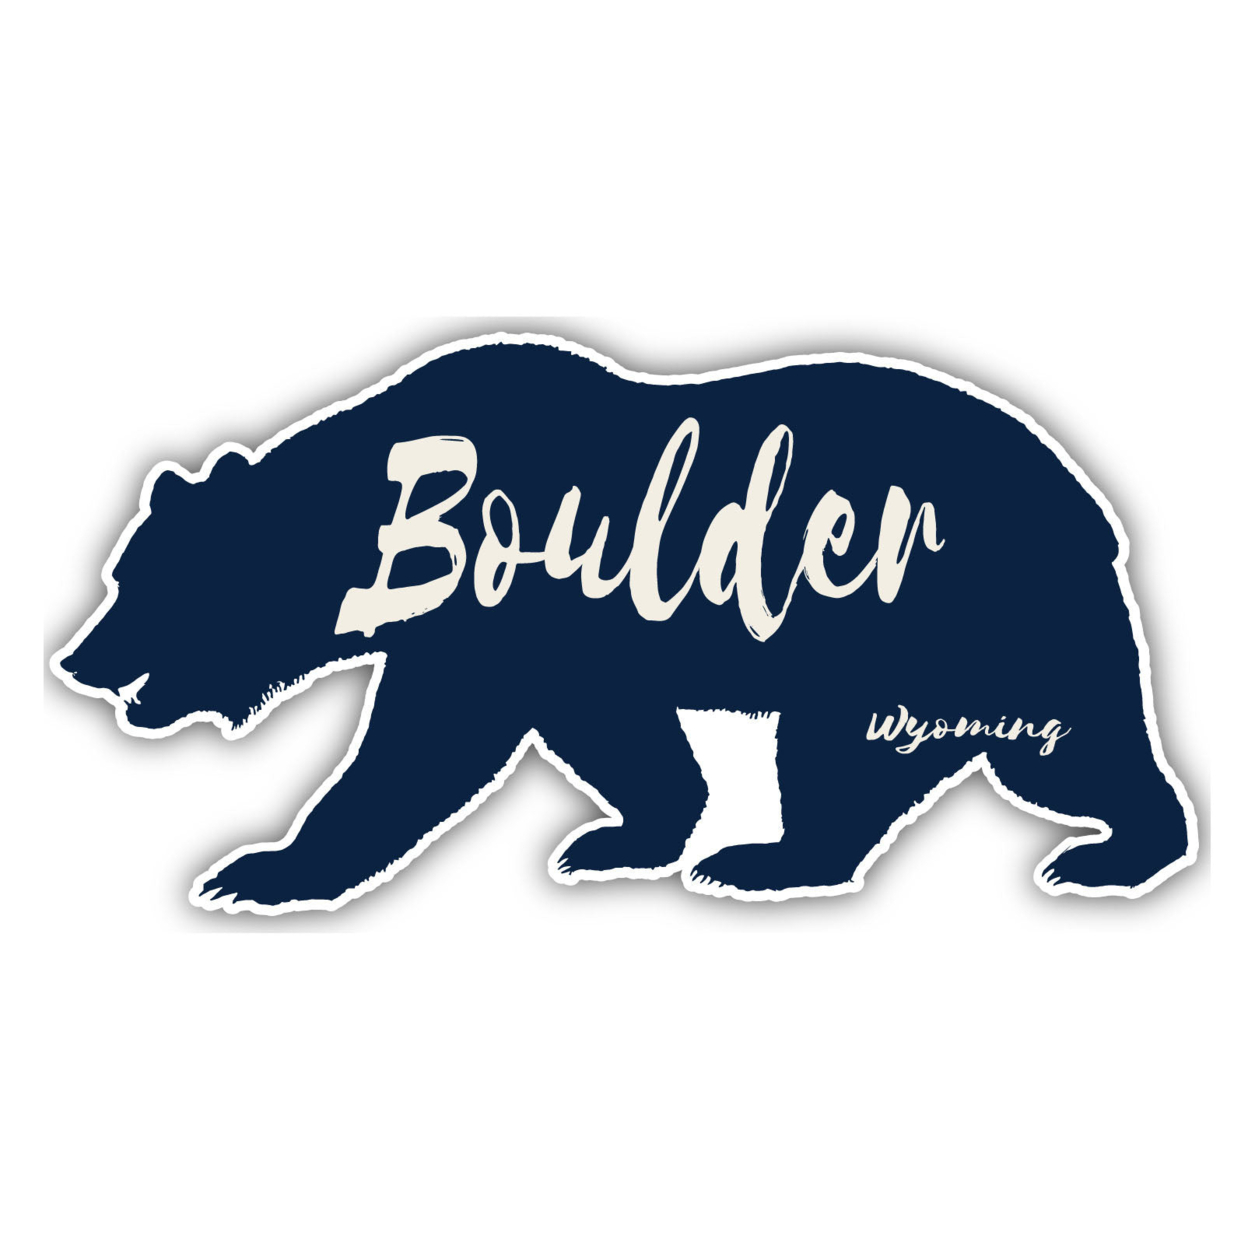 Boulder Wyoming Souvenir Decorative Stickers (Choose Theme And Size) - 4-Pack, 10-Inch, Bear